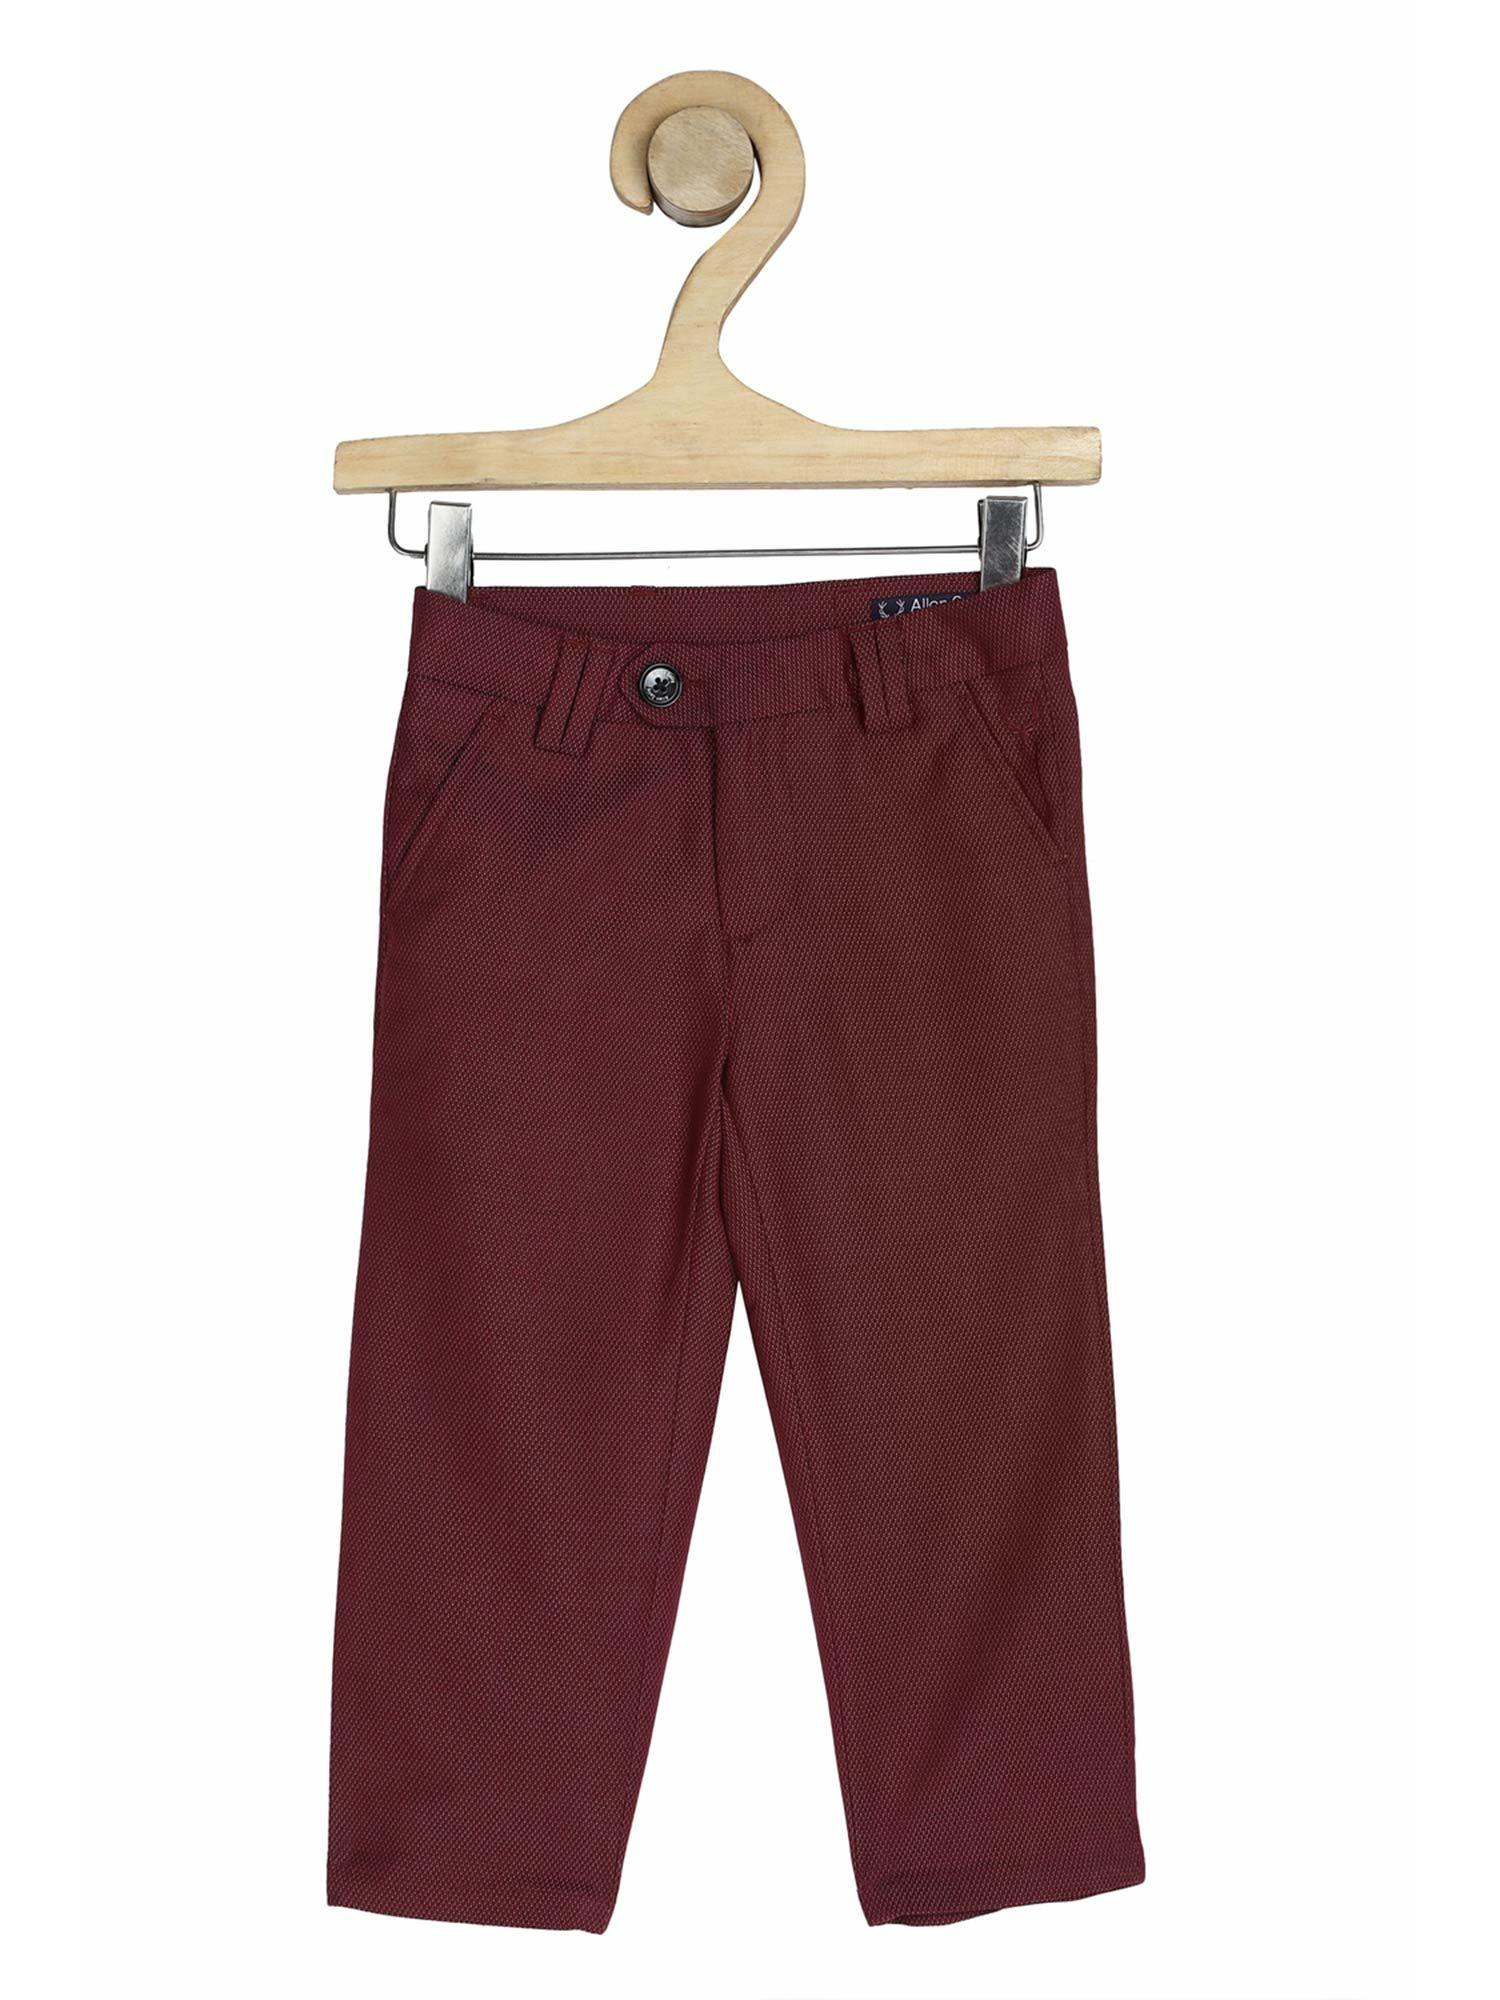 solid maroon trousers